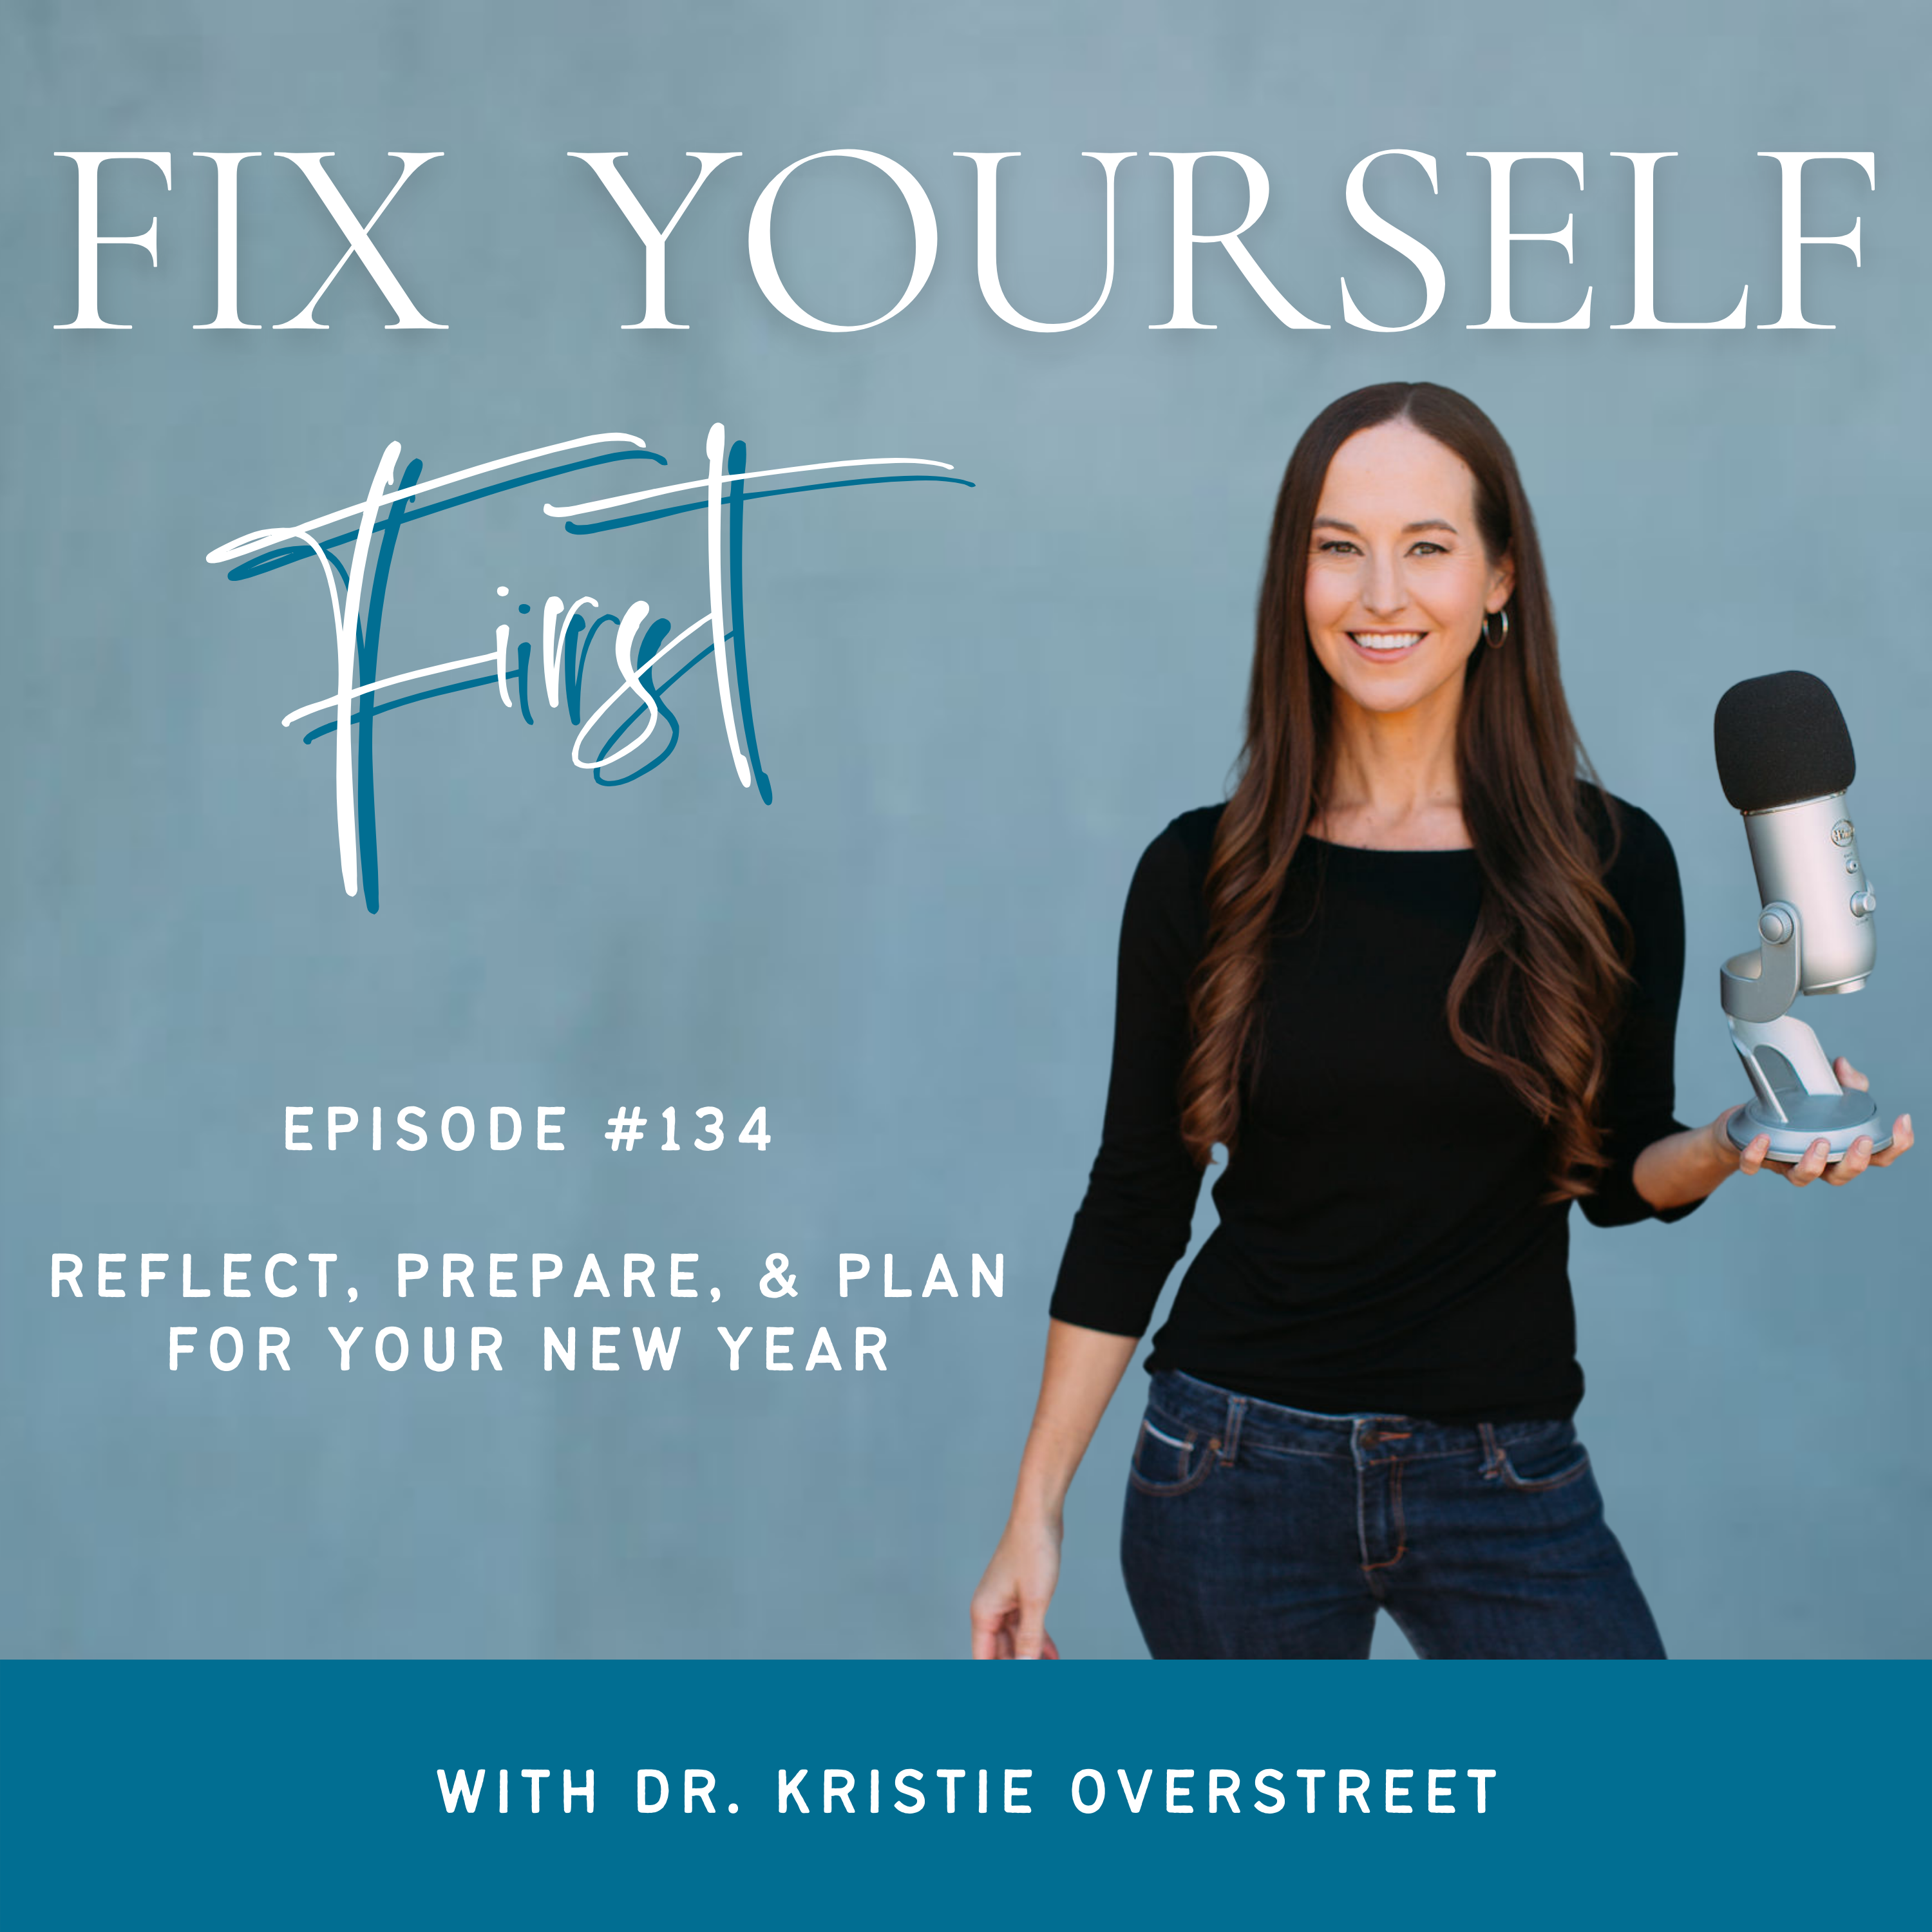 Fix Yourself First Episode 134 Reflect, Prepare, & Plan for Your New Year